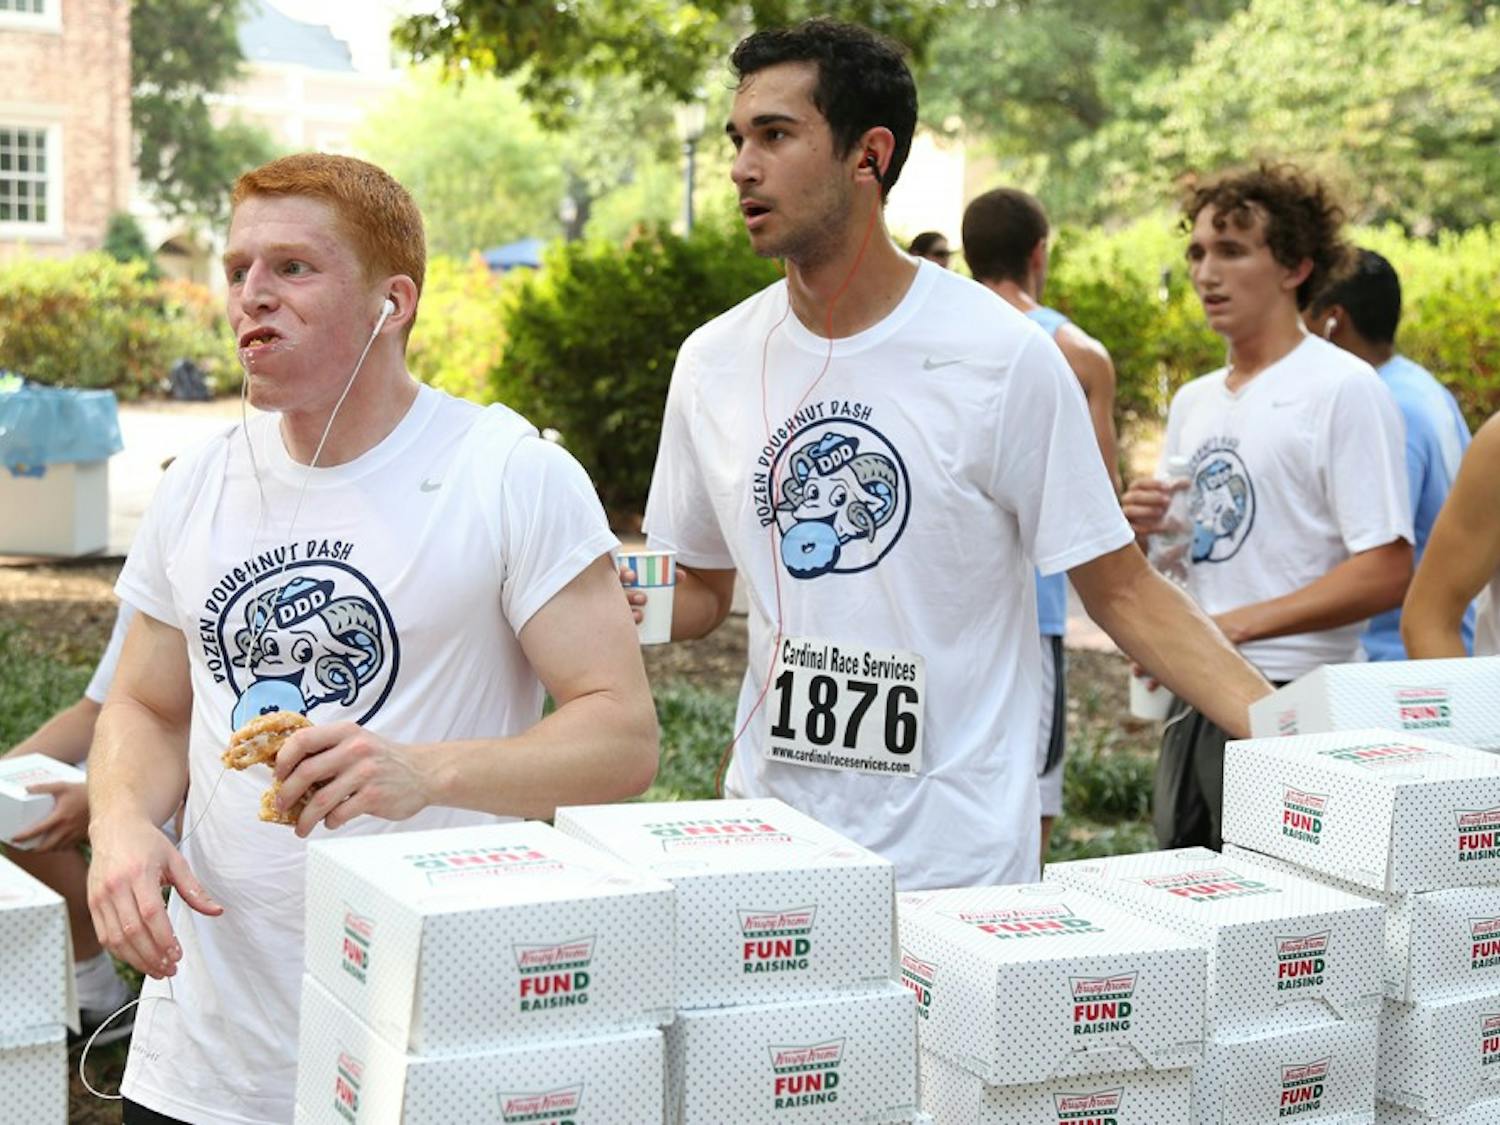 The Dozen Donut Dash began at the Old Well on Friday morning in September 2015. Participants had to run 2.5 miles before eating a dozen Krispy Kreme donuts and running another 1.5 miles. The race raises awareness and support for cancer patients.&nbsp;